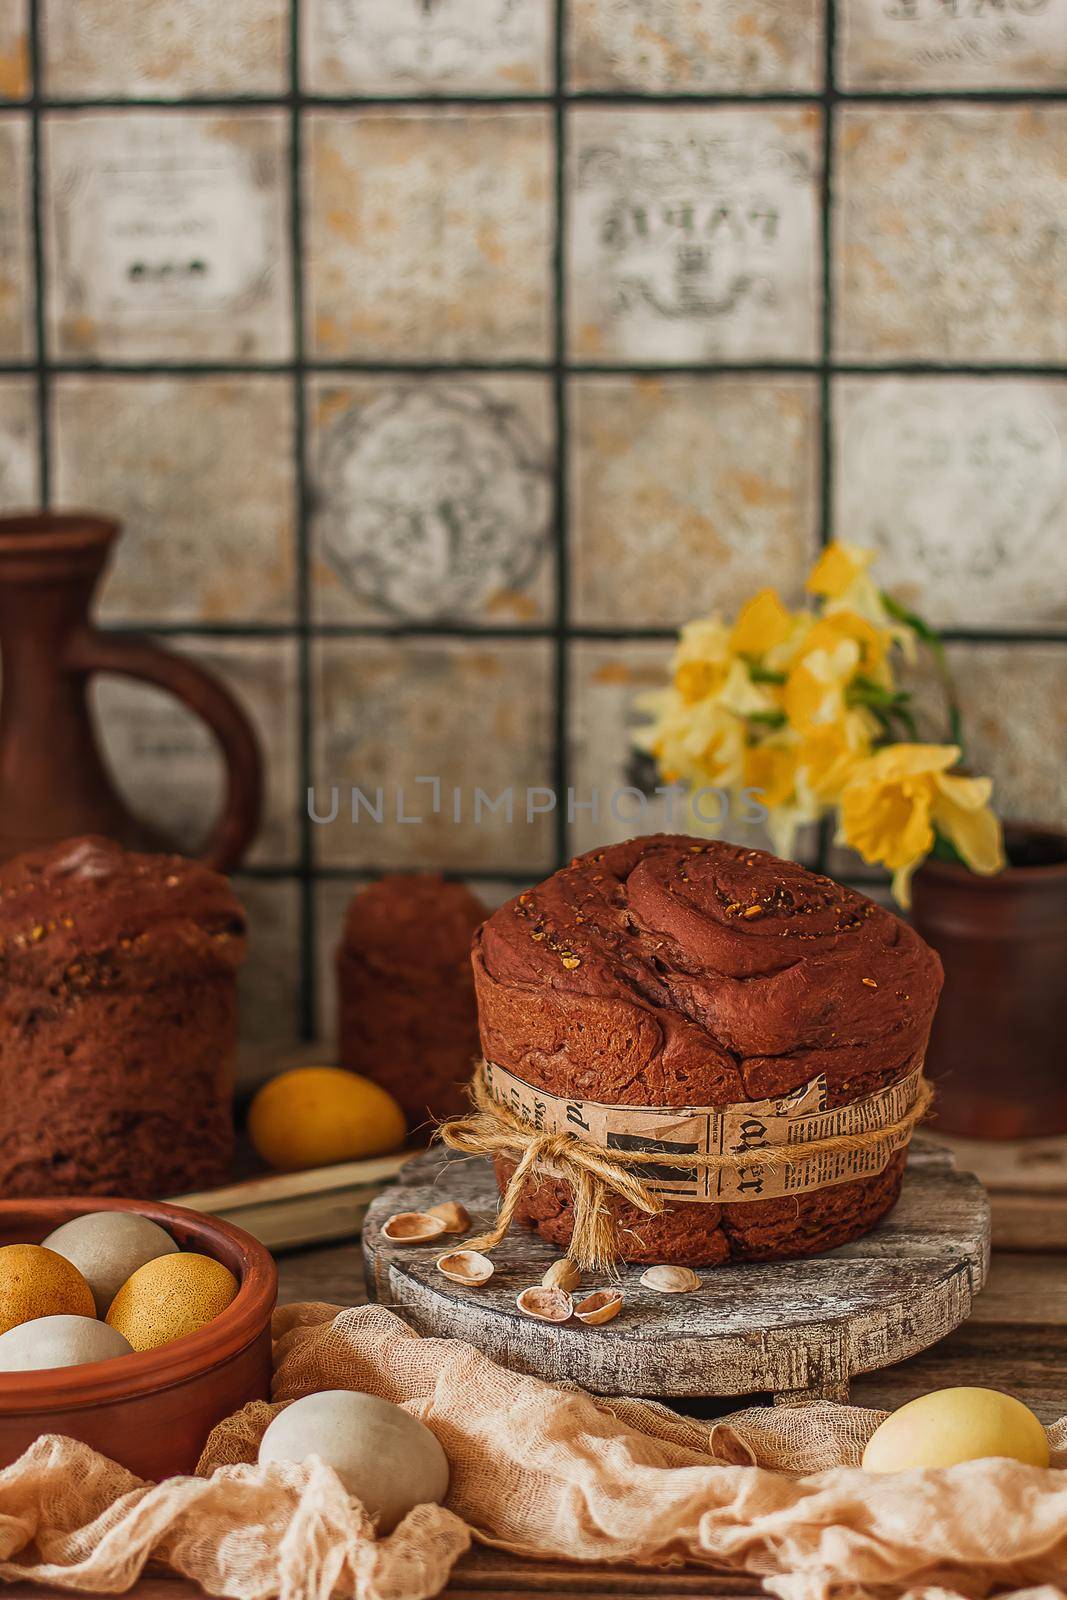 Kulich cake with yellow daffodil flowers, and painted eggs symbol of Traditional Russian Orthodox Easter by mmp1206